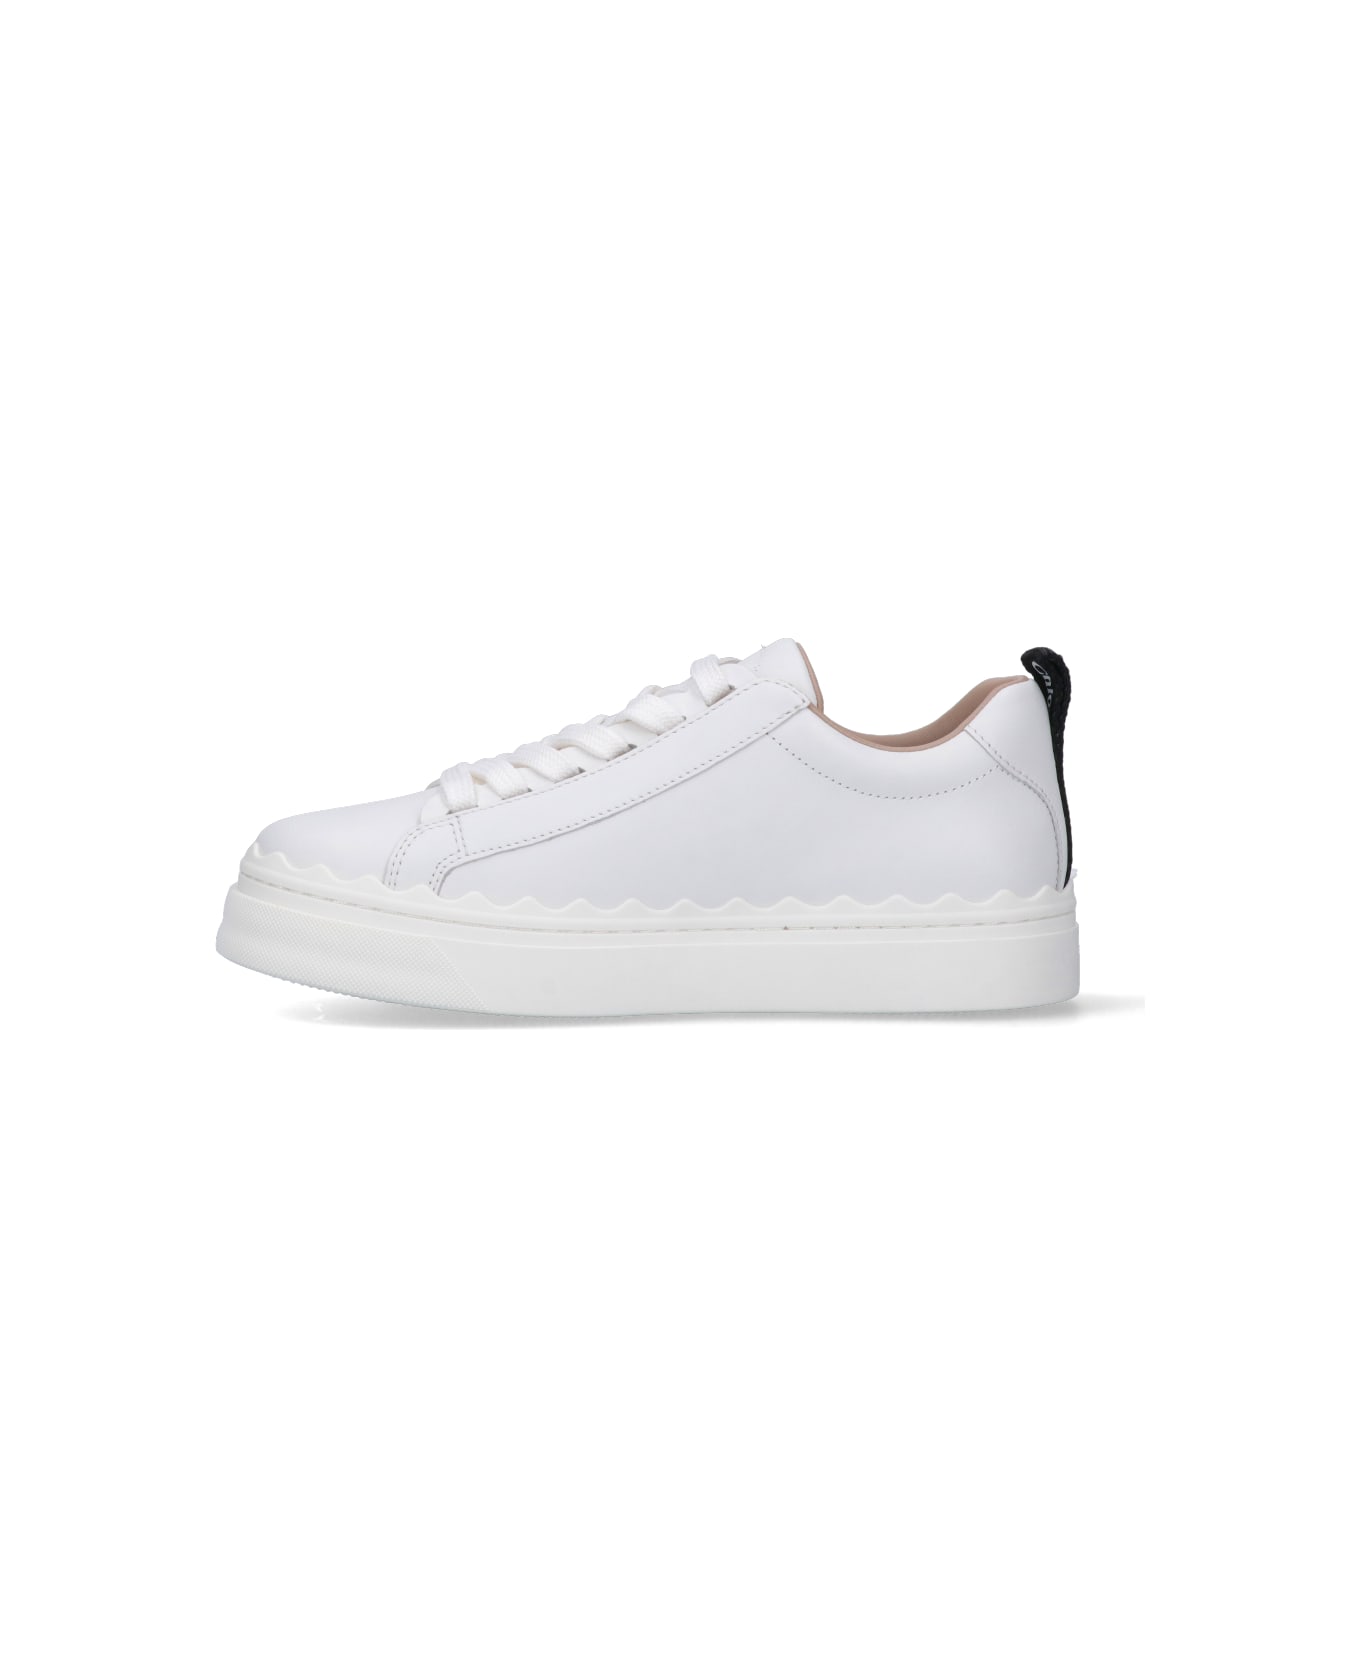 Chloé Lauren Sneakers In White Leather - Bianco スニーカー